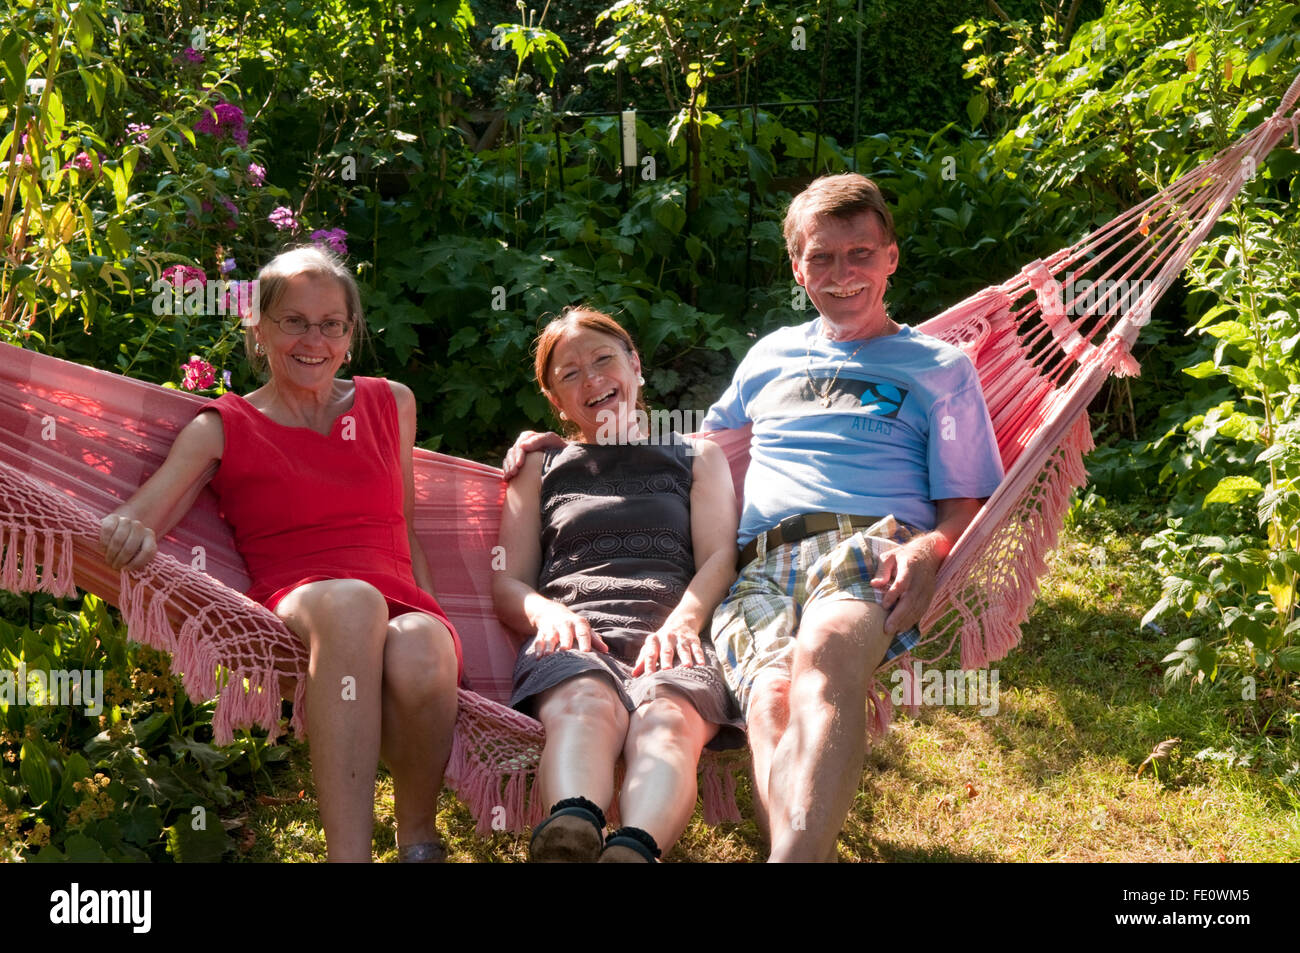 Three very happy looking middle-aged people, couple and friend, sitting on a hammock in afternoon sunshine Stock Photo